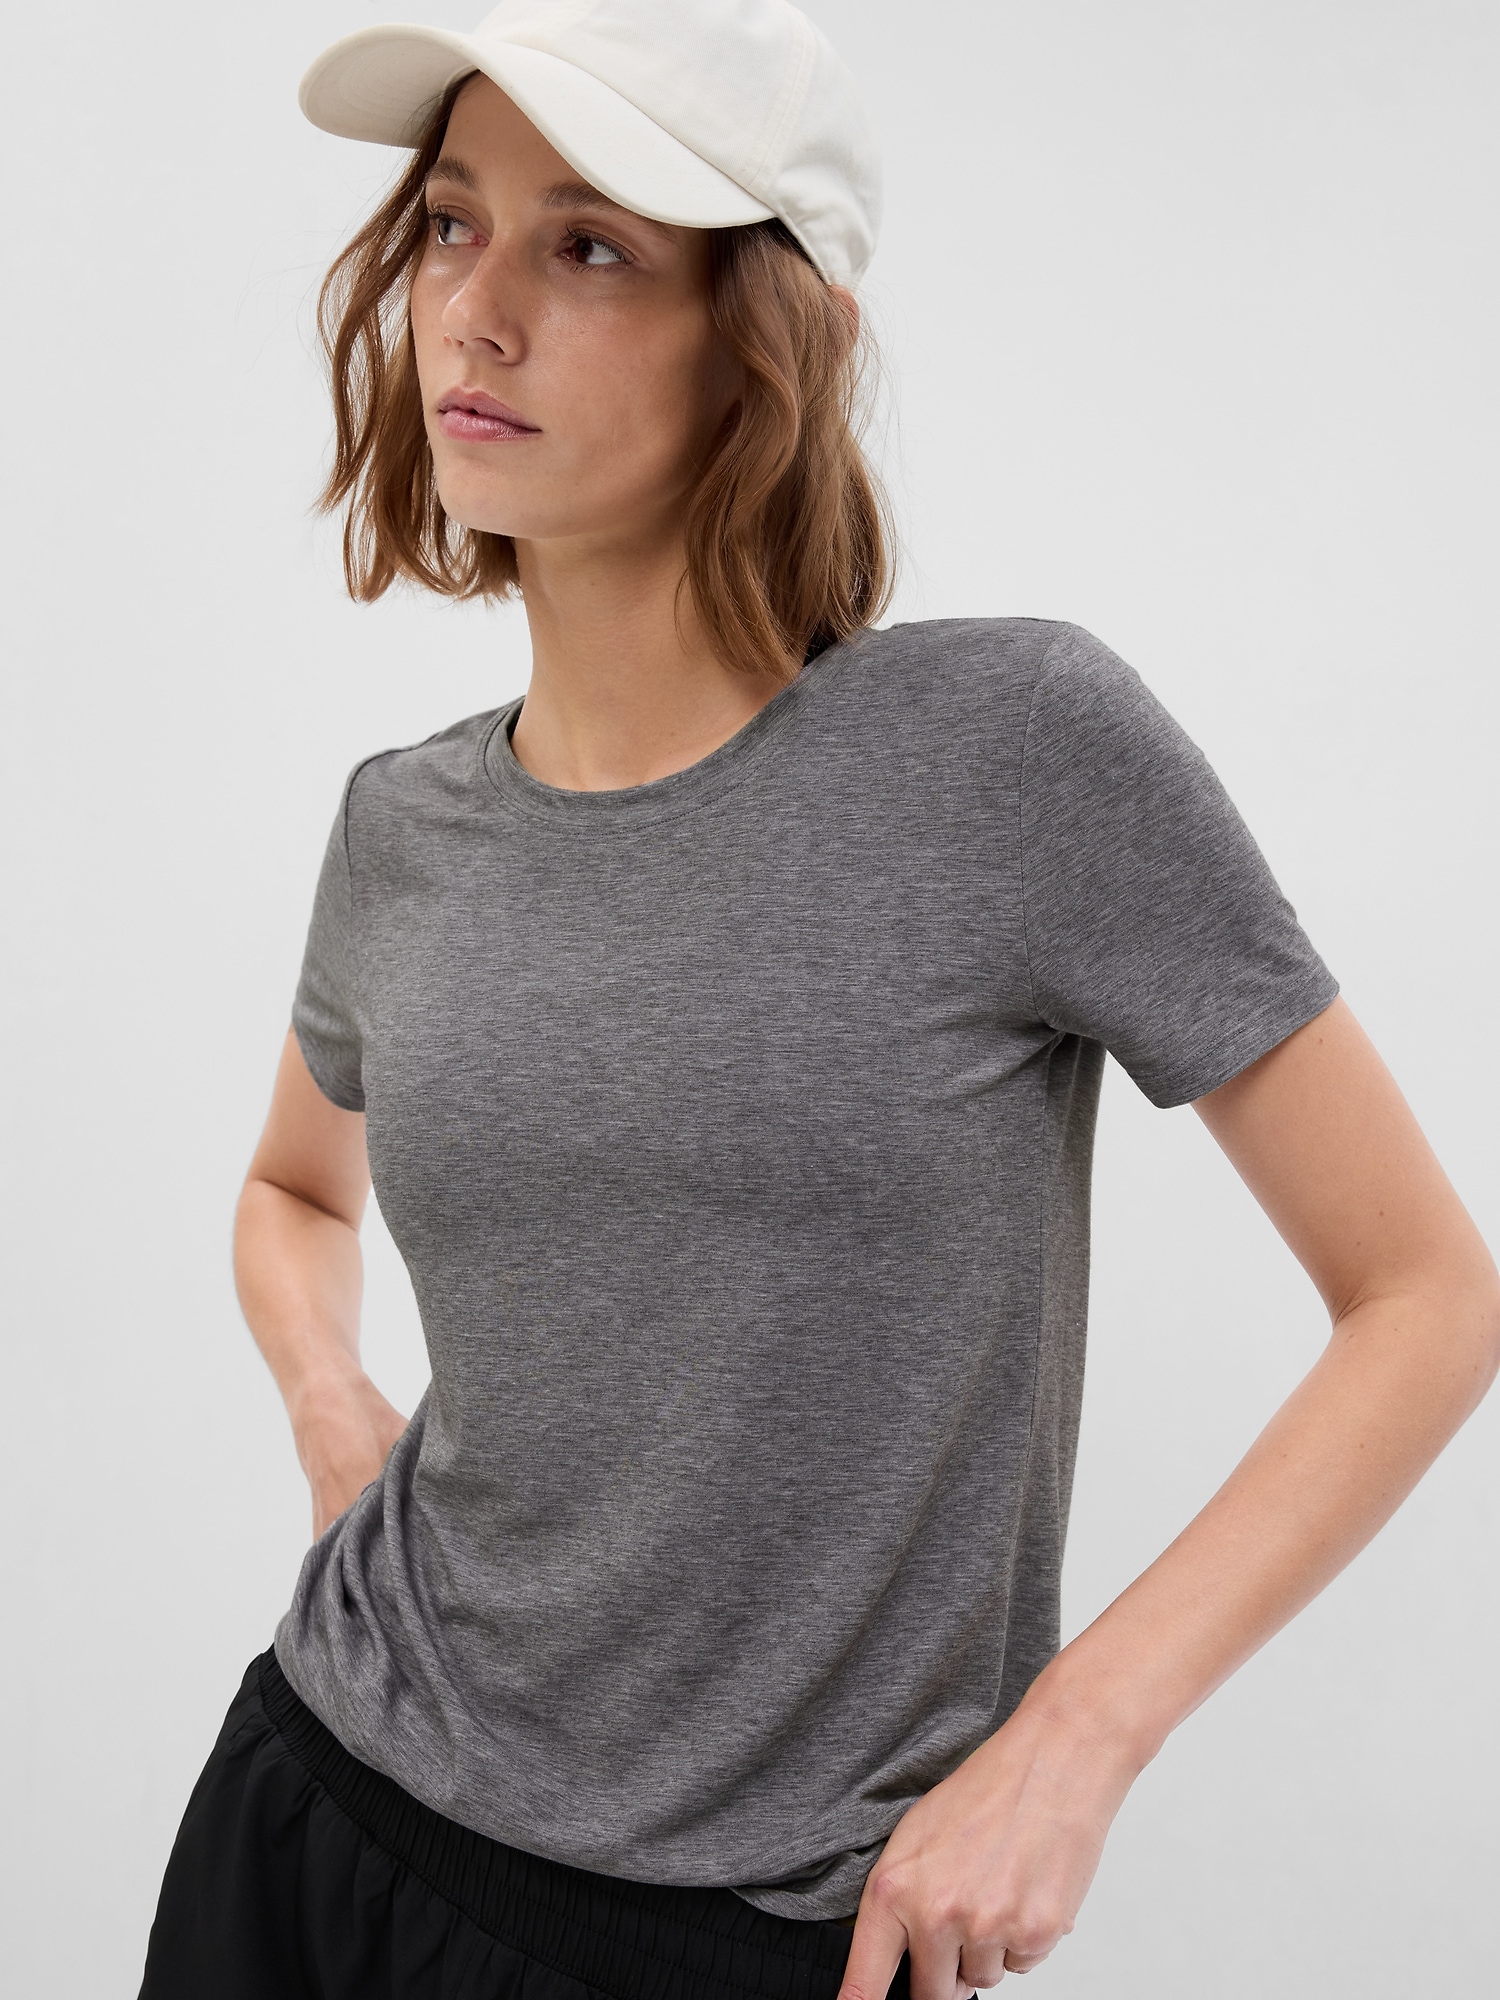 Gap Fit Breathe T-shirt In Charcoal Grey